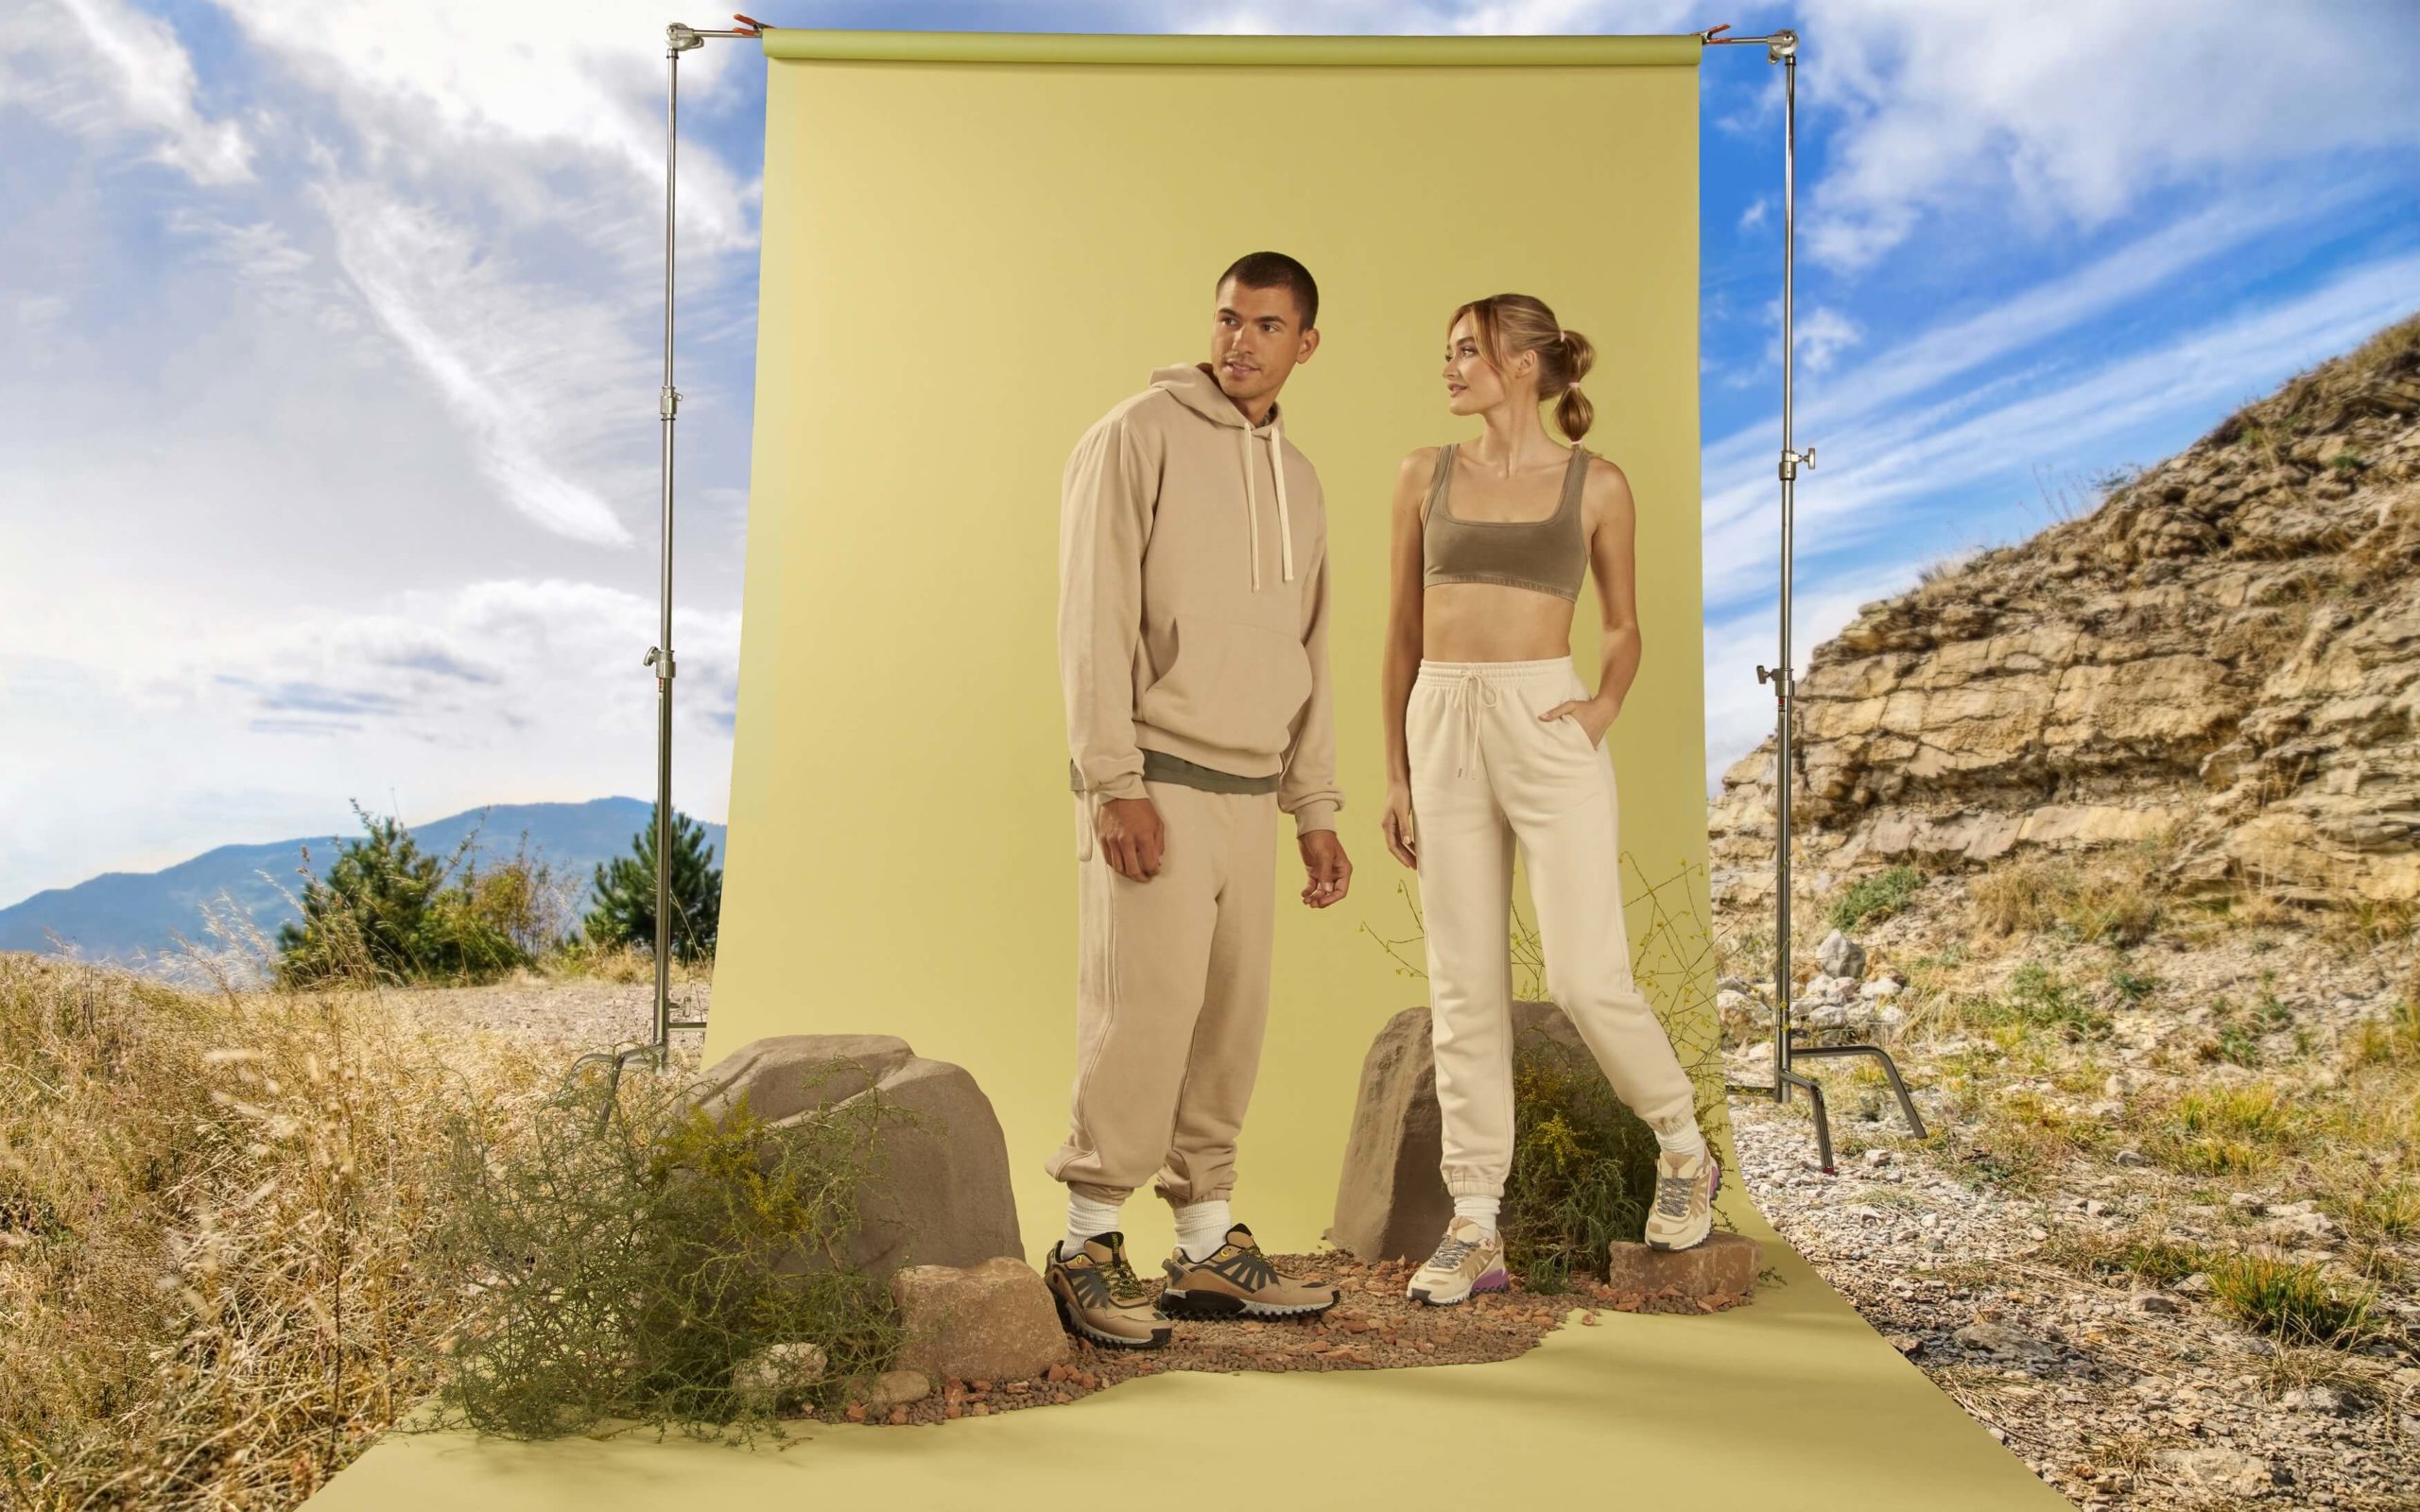 A male and female models in front of landscape setup for photography with all green shades in background